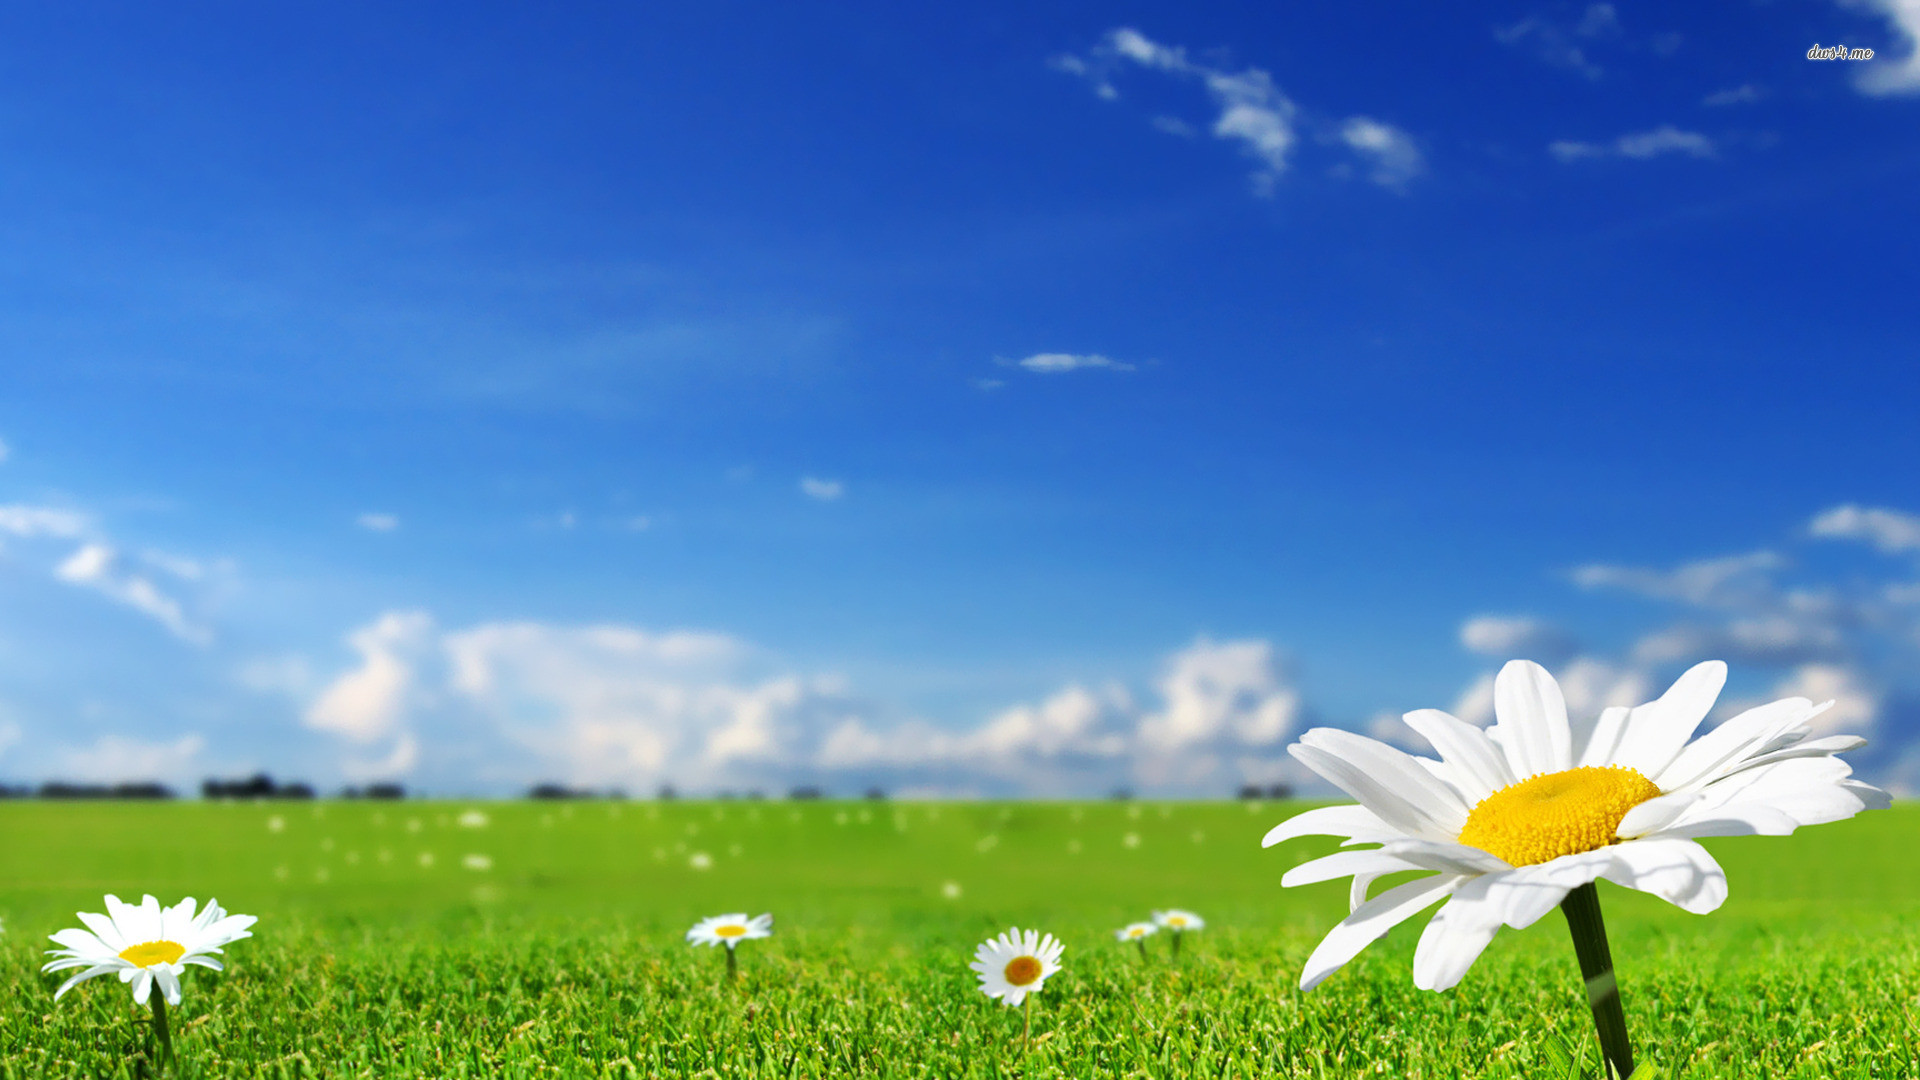 1920x1080 Daisies Wallpaper Nature Wallpapers px